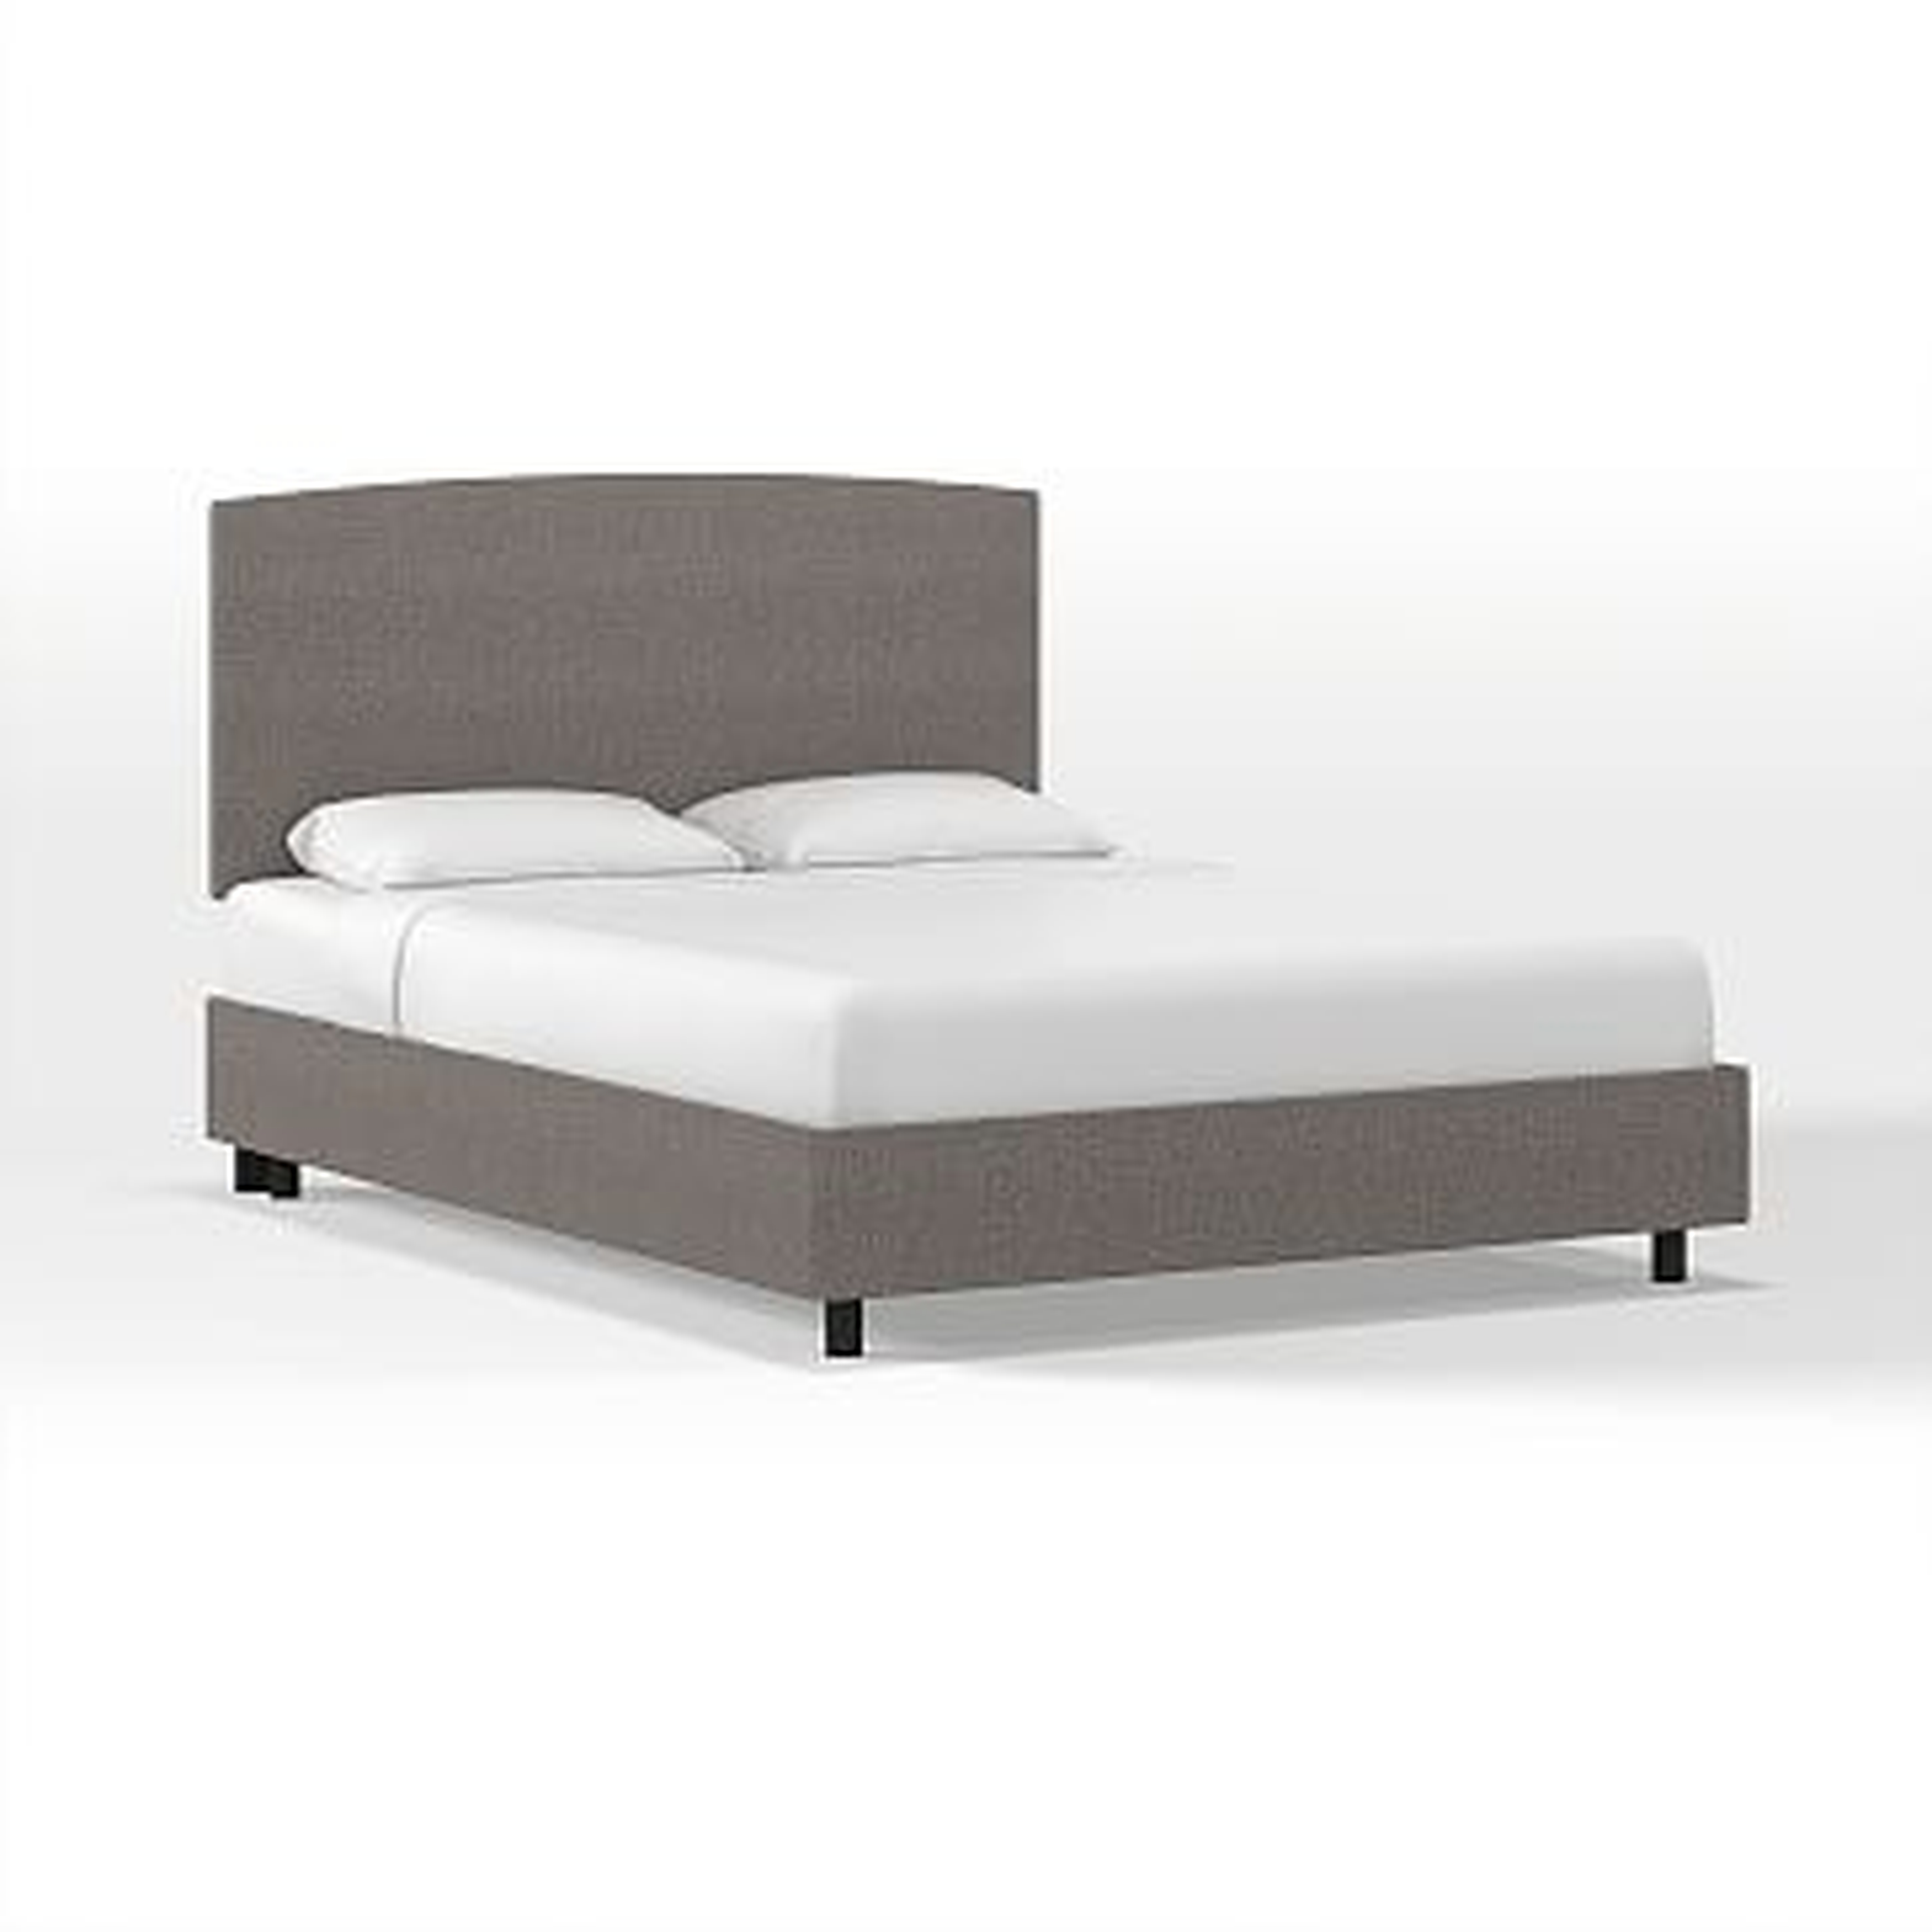 Skyline Upholstered Bed, Cal King, Deco Weave, Feather Gray - West Elm